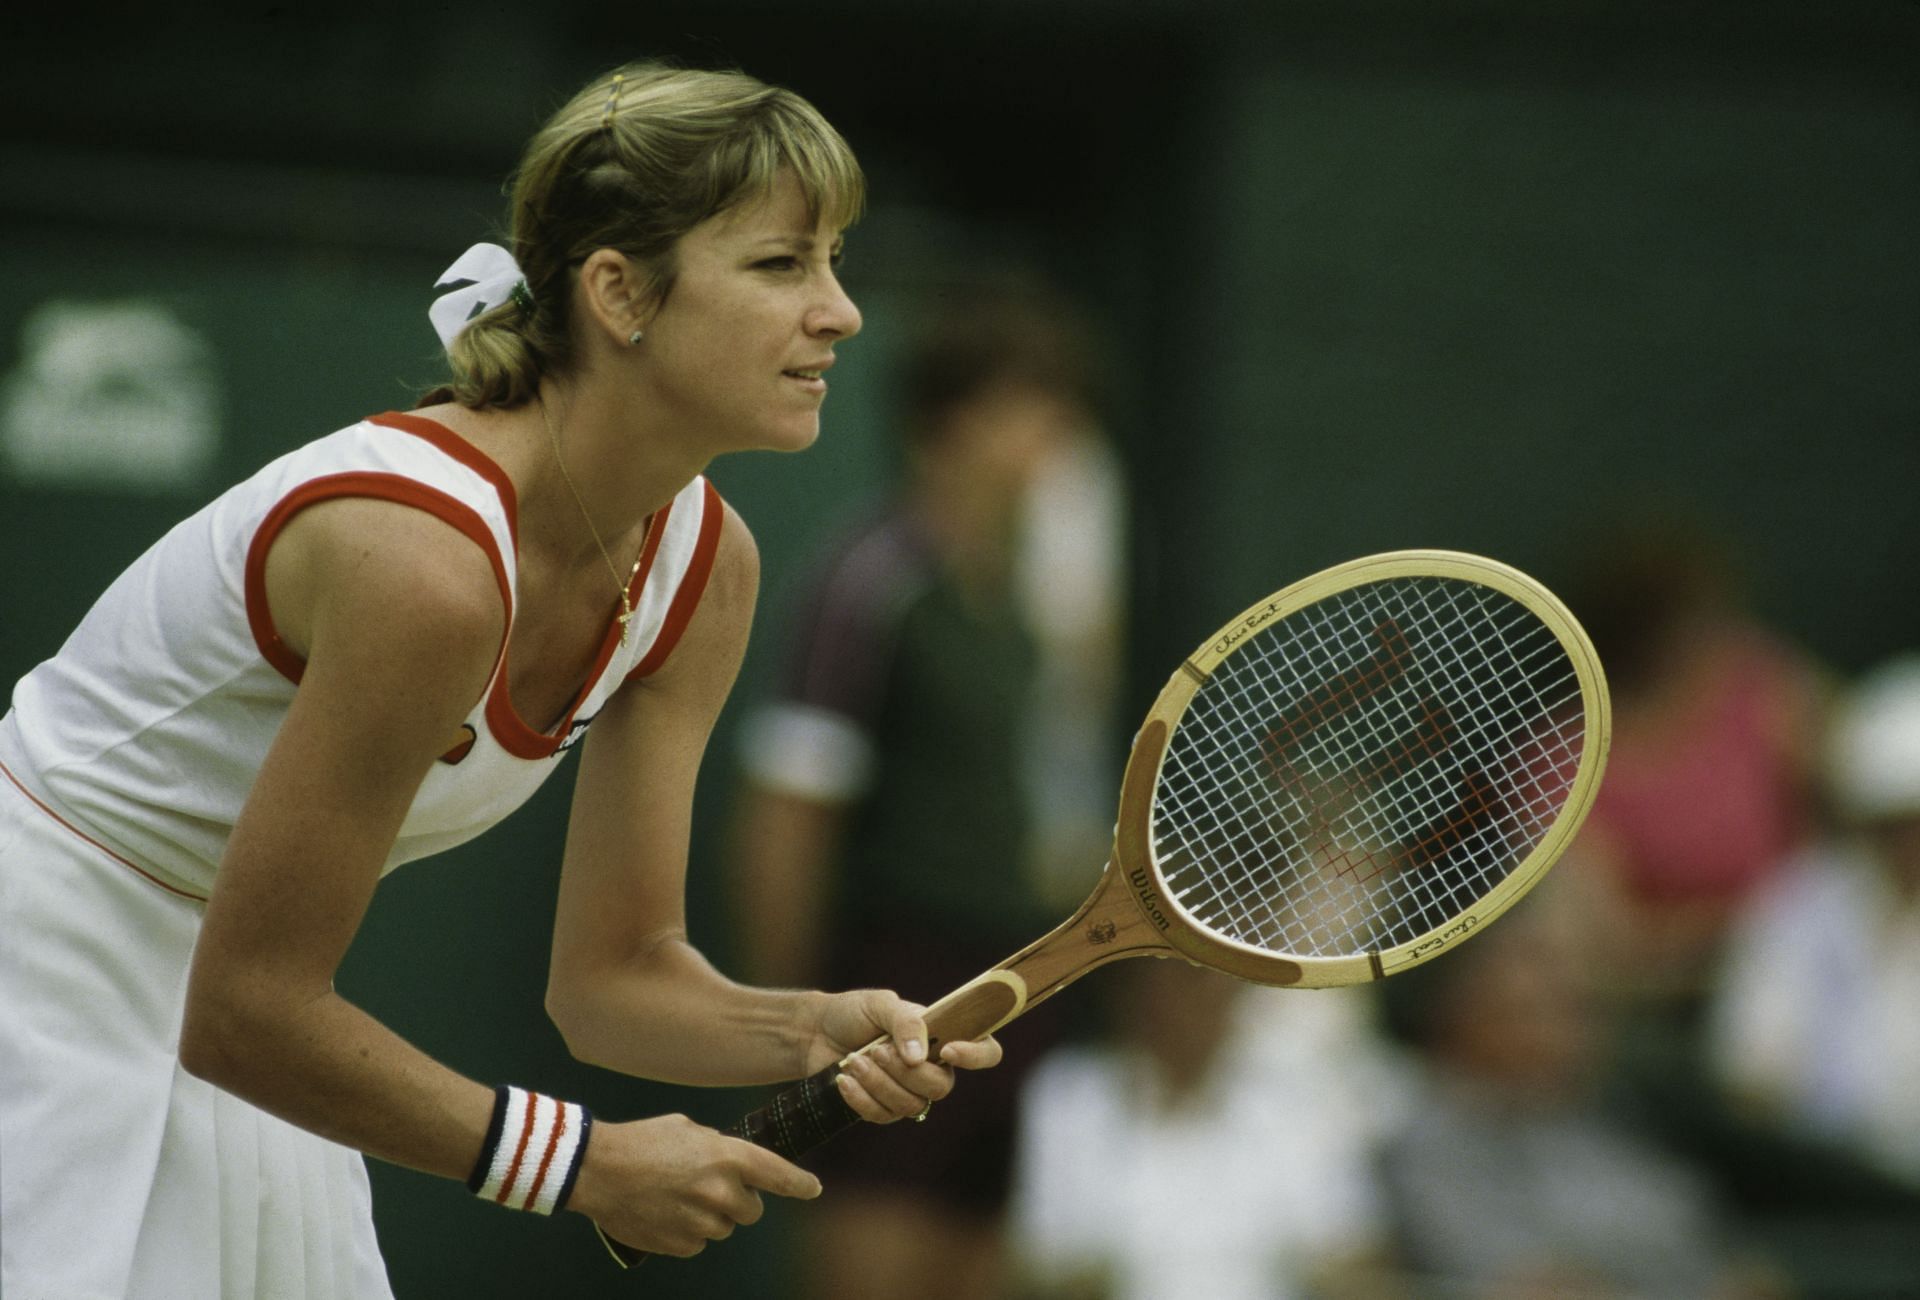 Chris Evert&#039;s relationship with Jimmy Connors made headlines when they were together.